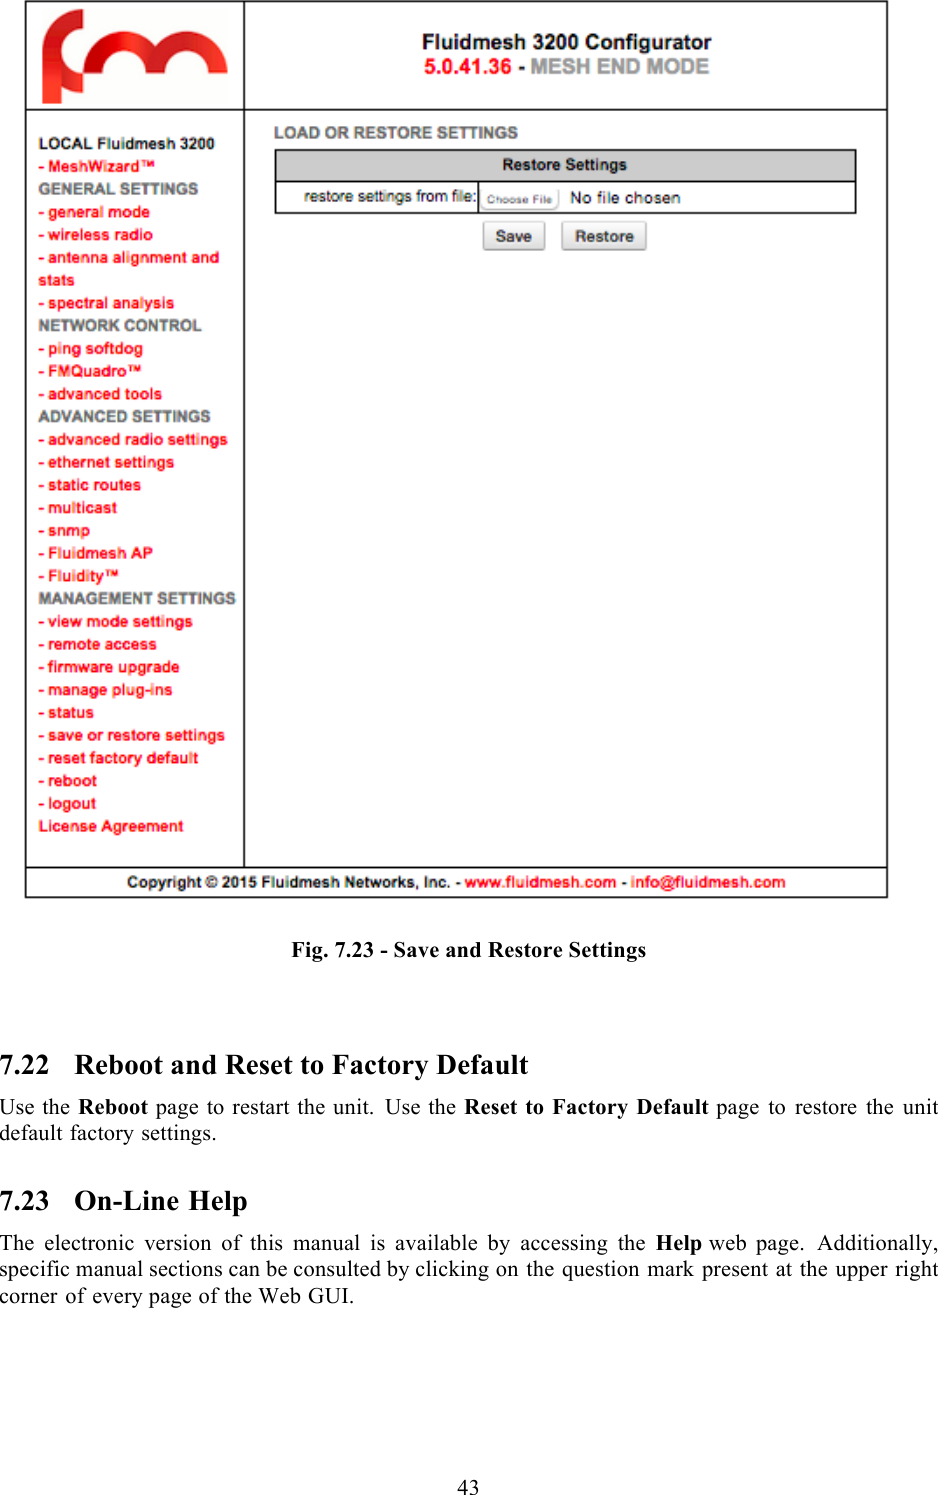  43   Fig. 7.23 - Save and Restore Settings  7.22 Reboot and Reset to Factory Default Use the Reboot page to restart the unit. Use the Reset to Factory Default page to restore the unit default factory settings. 7.23 On-Line Help The electronic version of this manual is available by accessing the Help web page. Additionally, specific manual sections can be consulted by clicking on the question mark present at the upper right corner of every page of the Web GUI. 